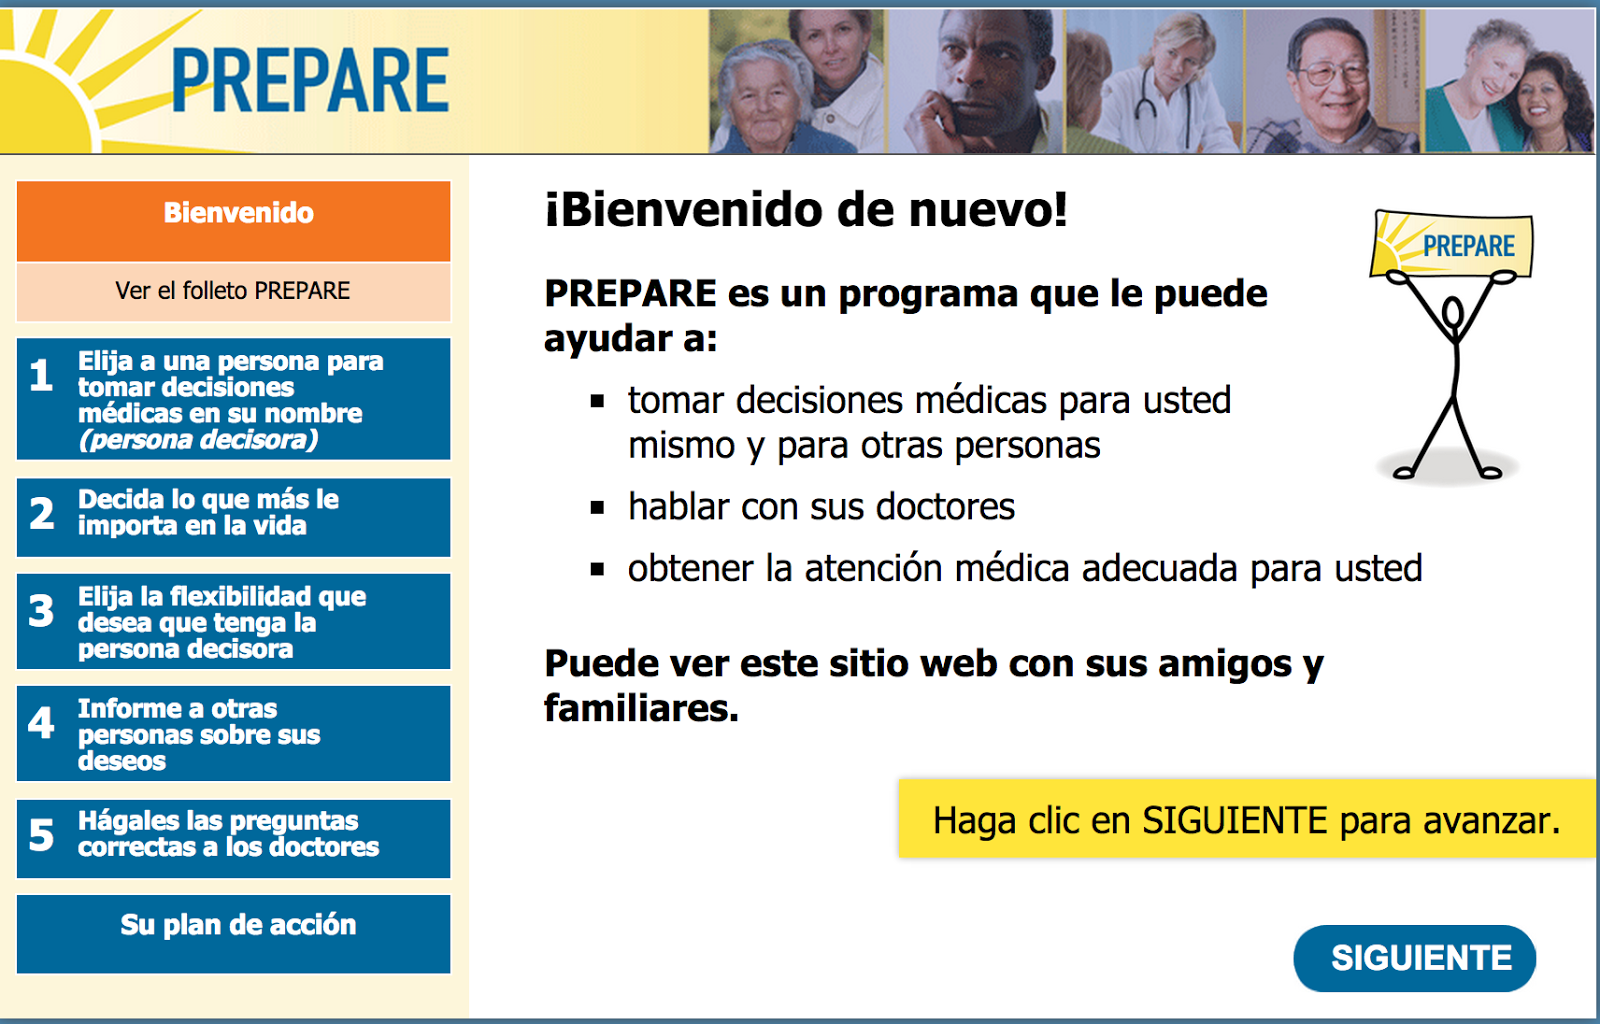 Advance care planning tool PREPARE, now in Spanish!